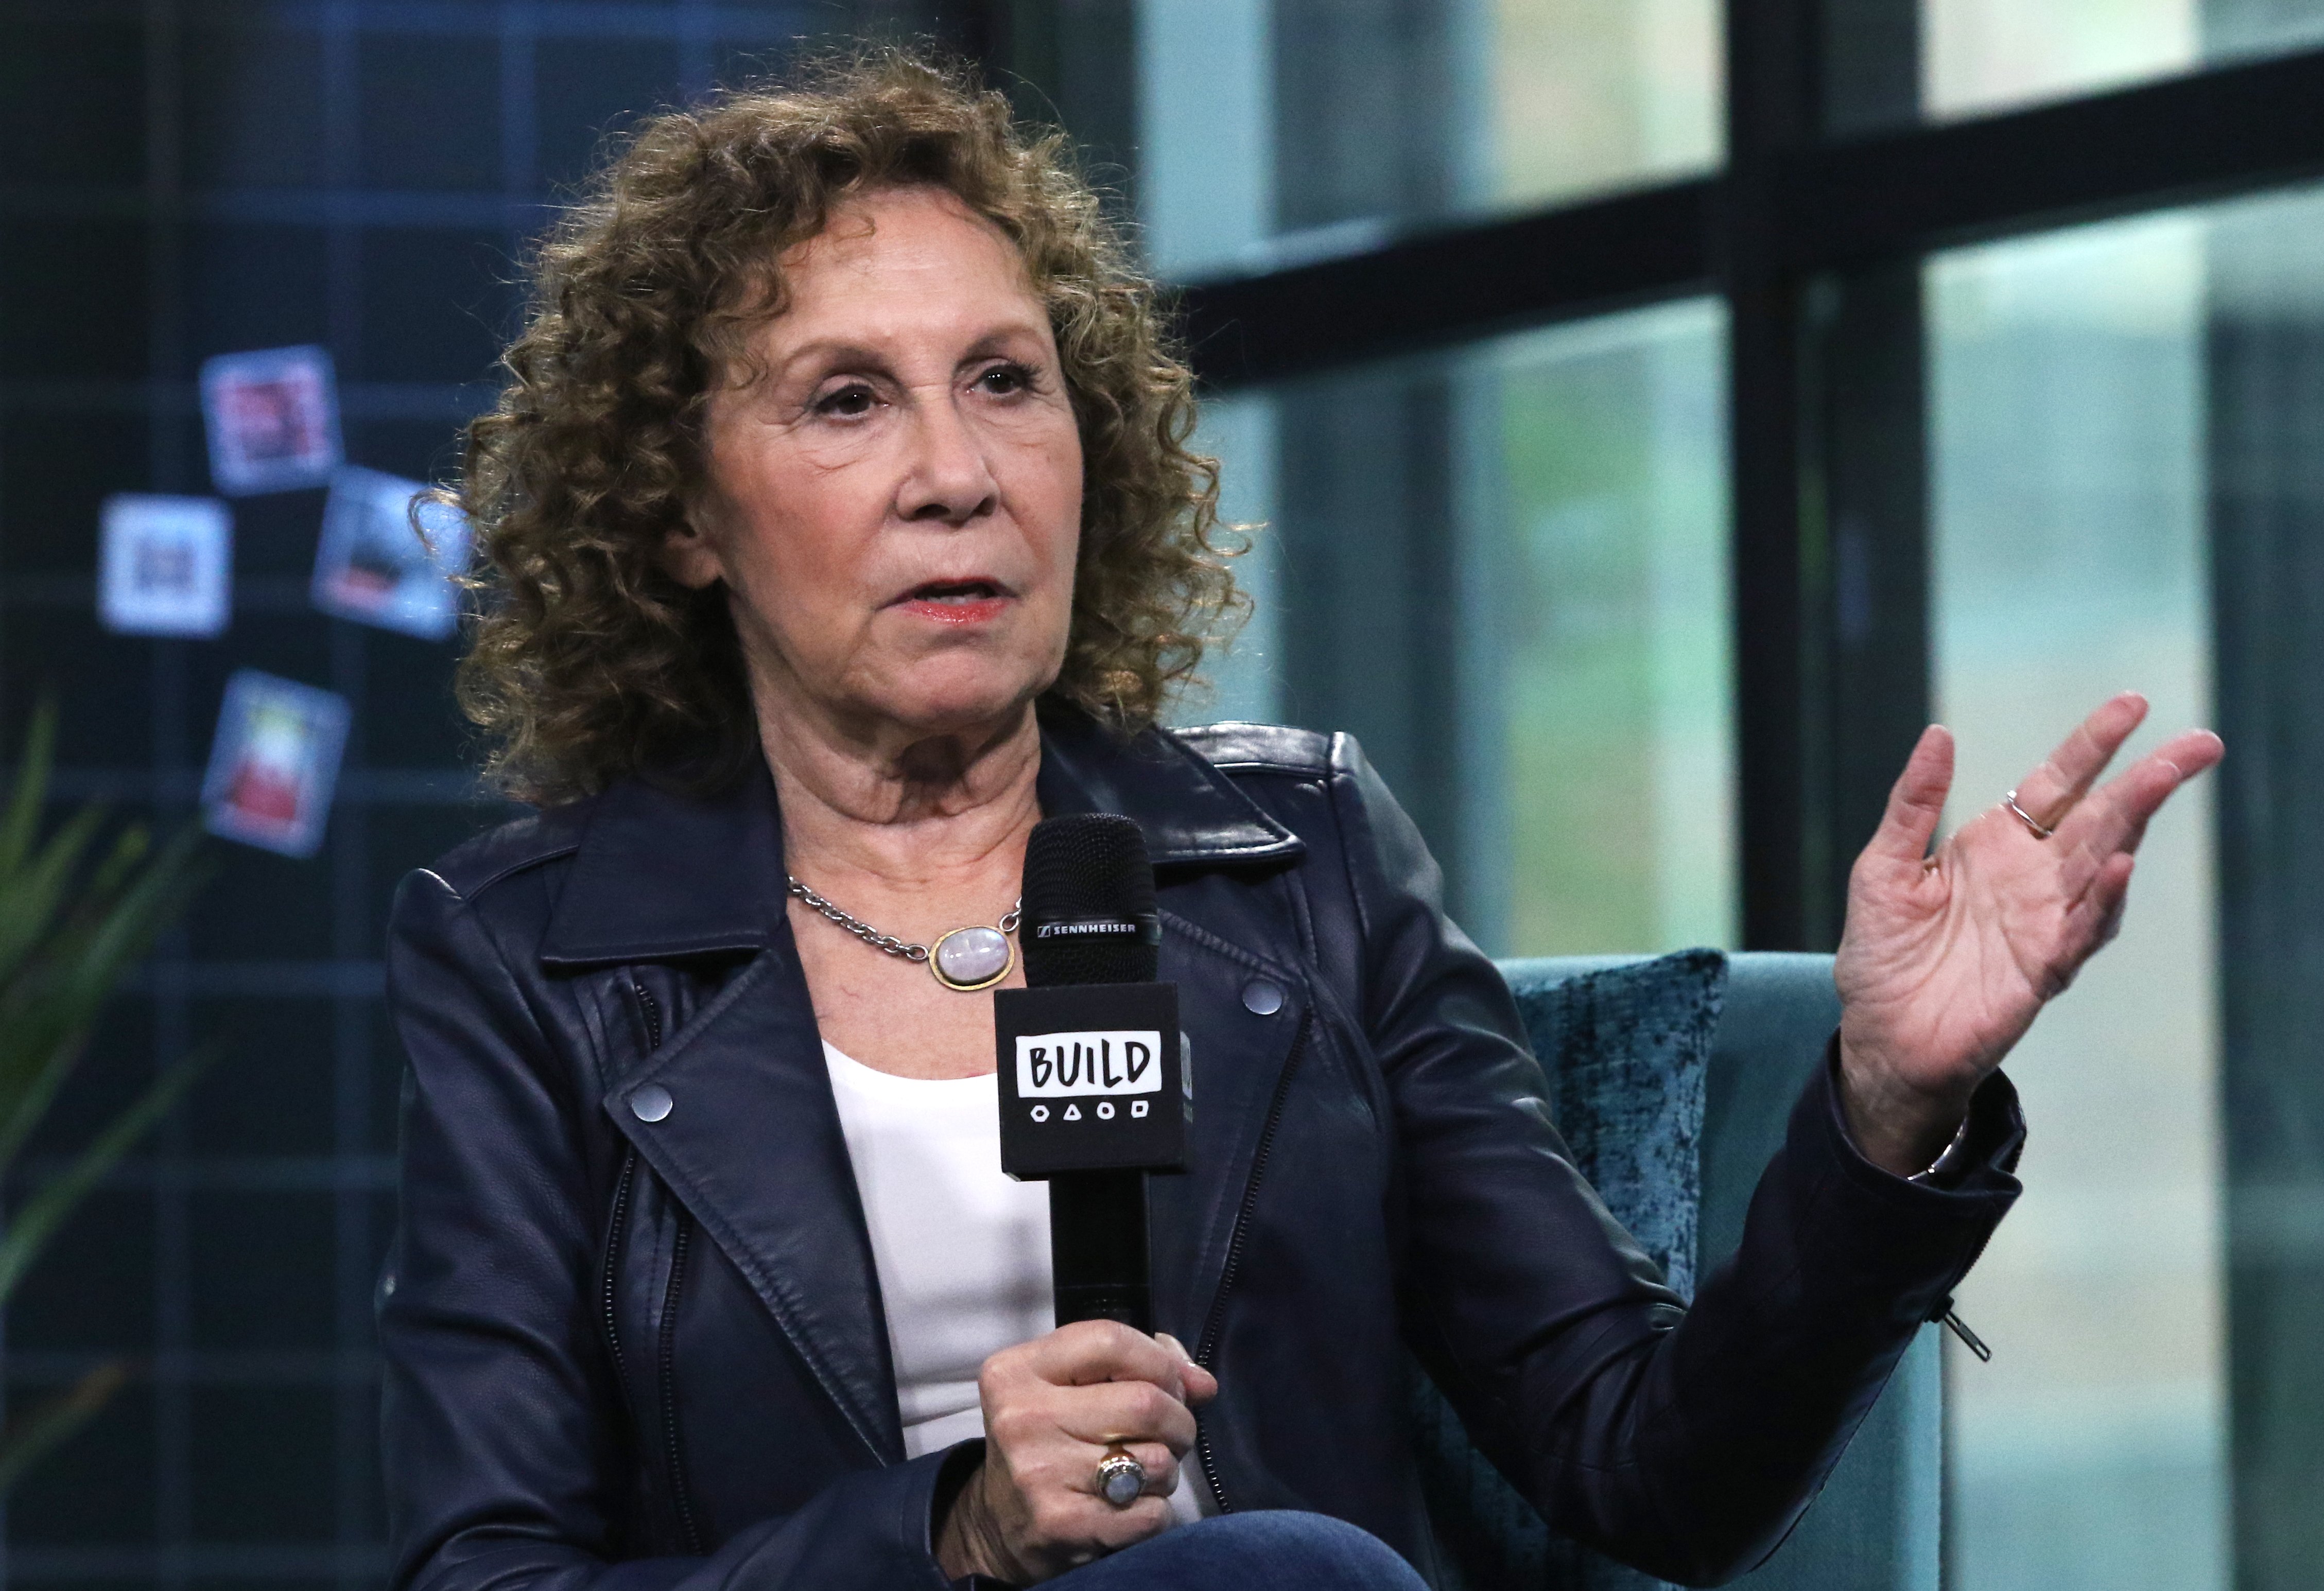 Rhea Perlman attends the Build Series to discuss "Poms" at Build Studio on May 09, 2019 in New York City. Photo: Getty Images